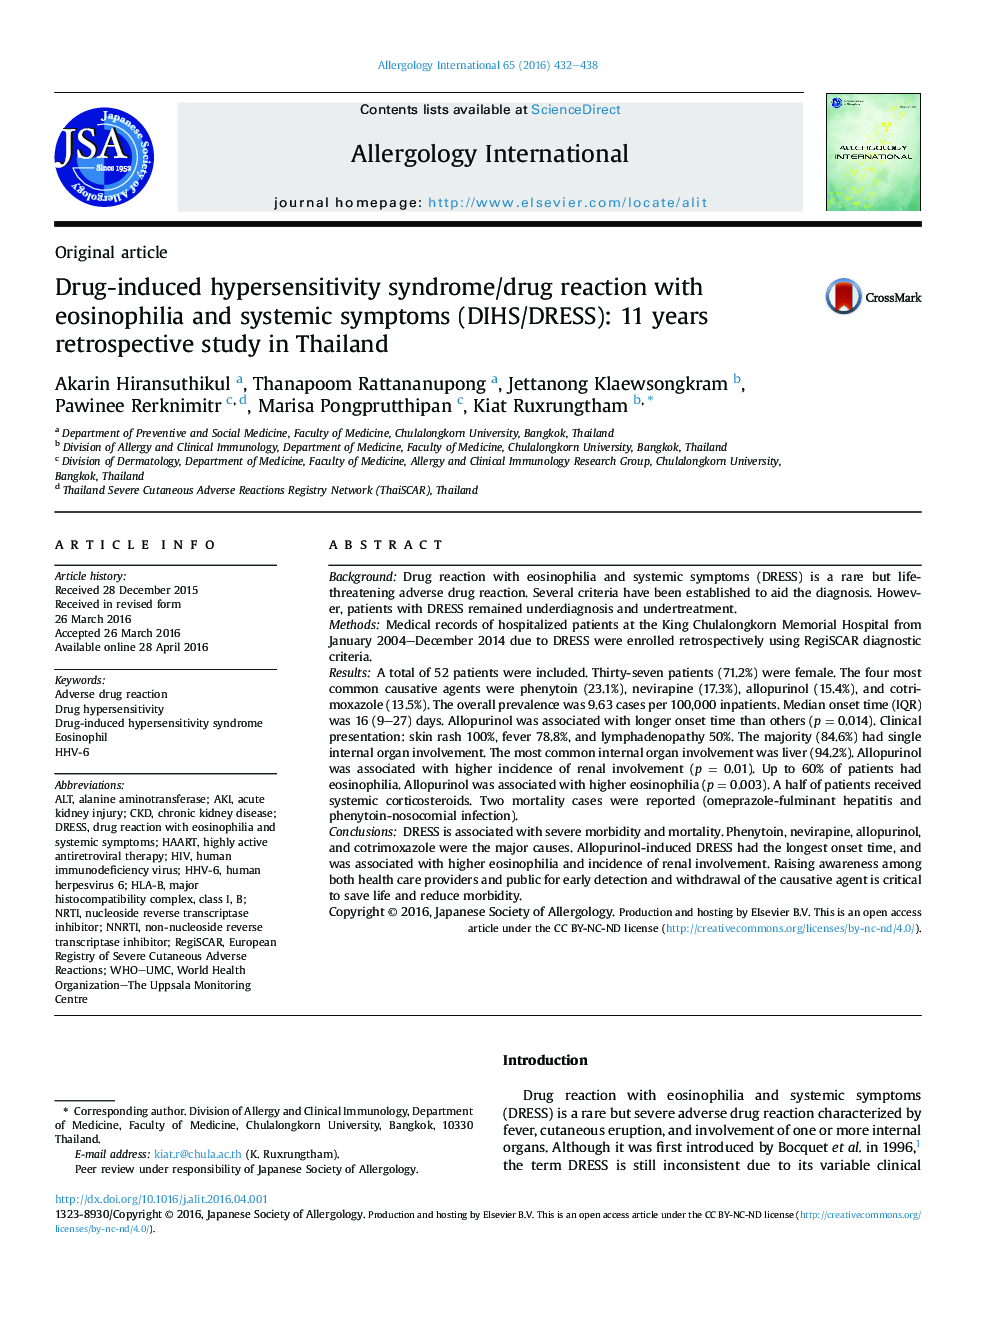 Drug-induced hypersensitivity syndrome/drug reaction with eosinophilia and systemic symptoms (DIHS/DRESS): 11 years retrospective study in Thailand